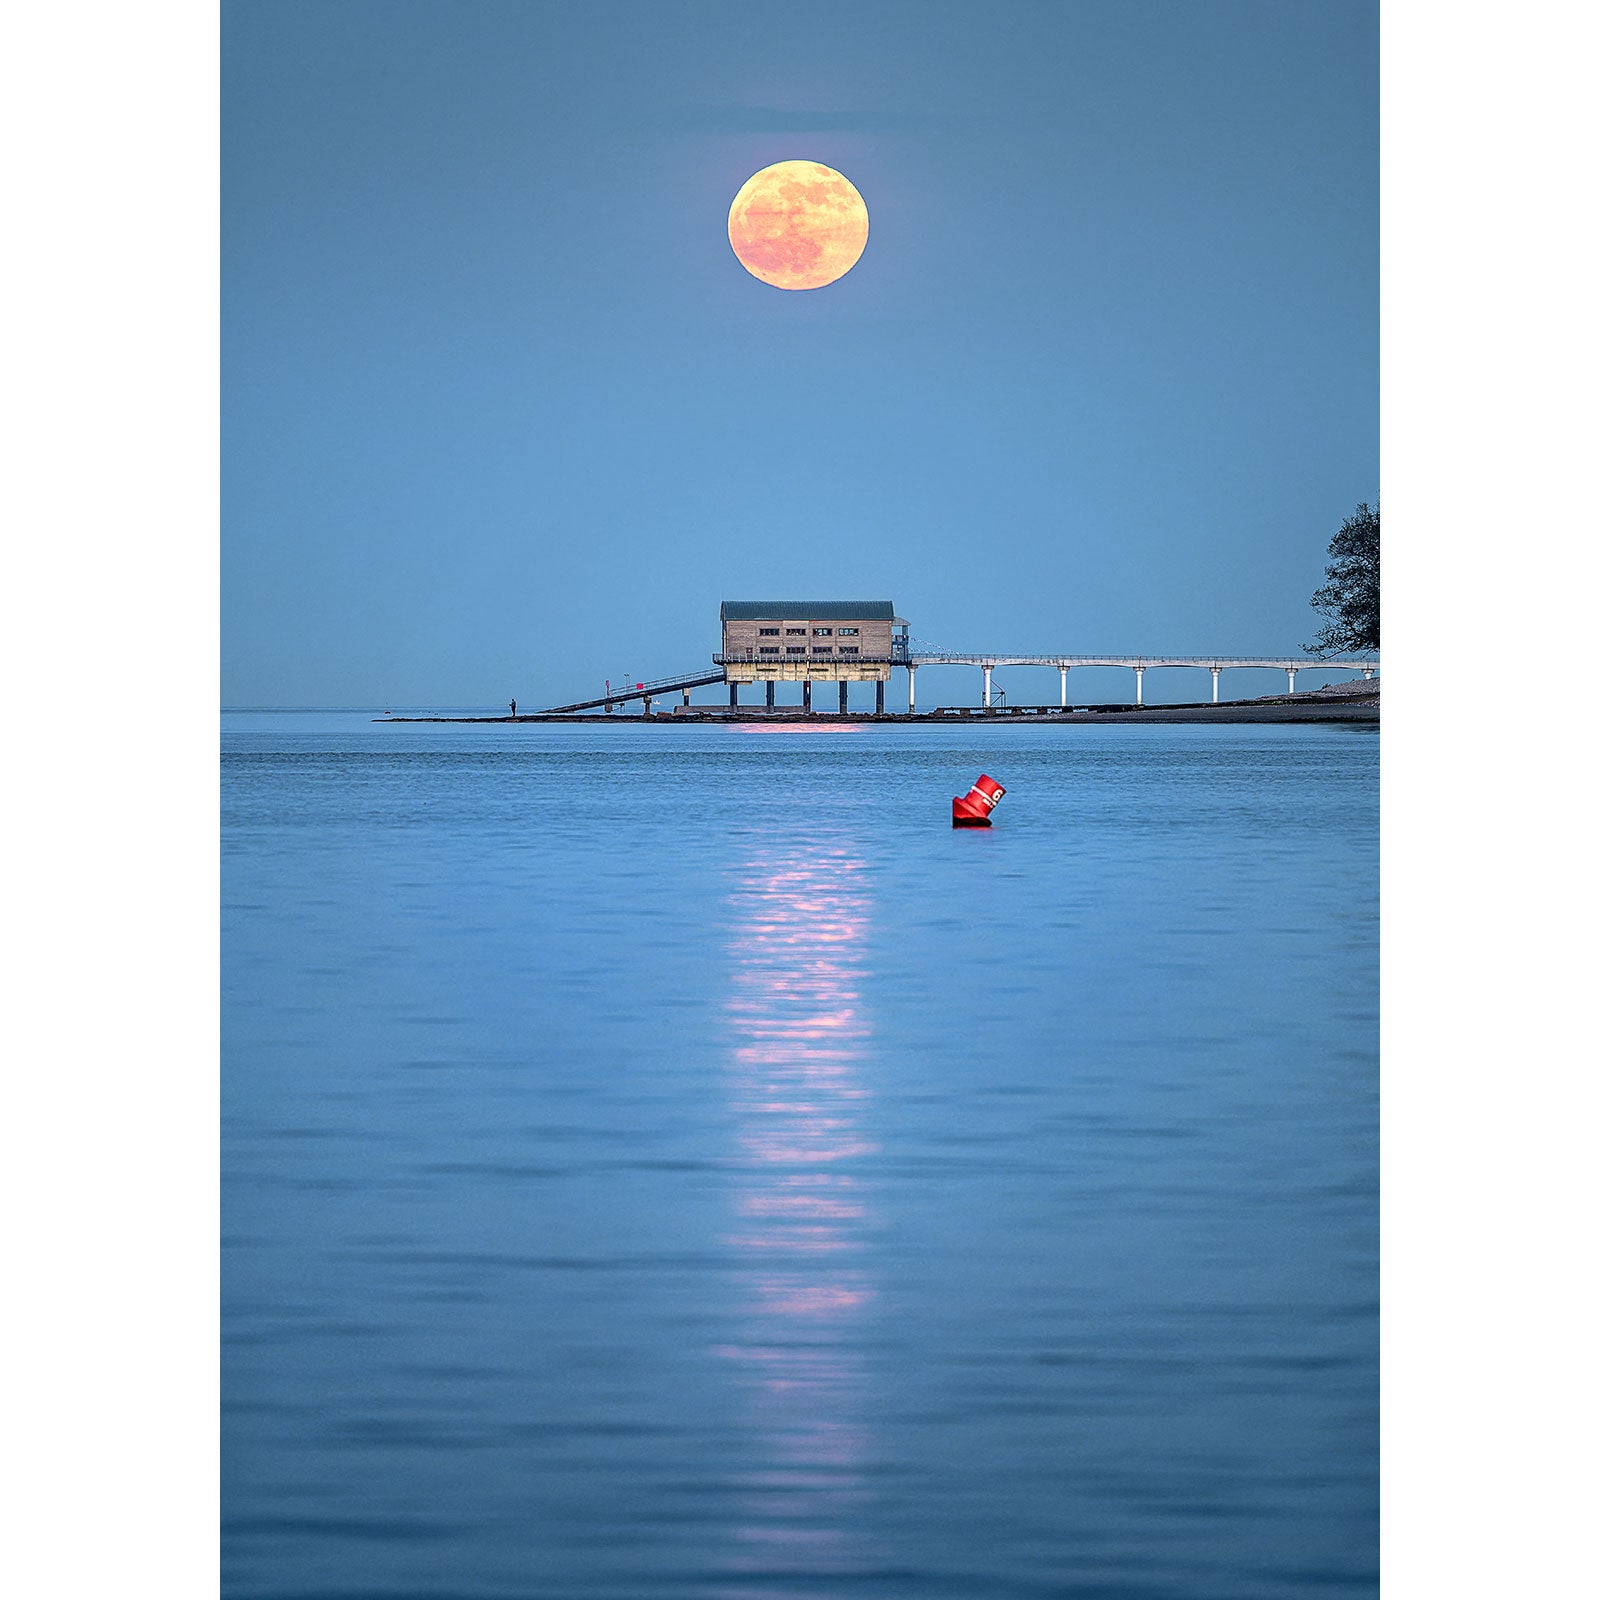 A Moonrise from Bembridge Lifeboat Station hovers over a serene seascape with a pier and a solitary figure in a red kayak off the Isle of Wight, captured by Available Light Photography.